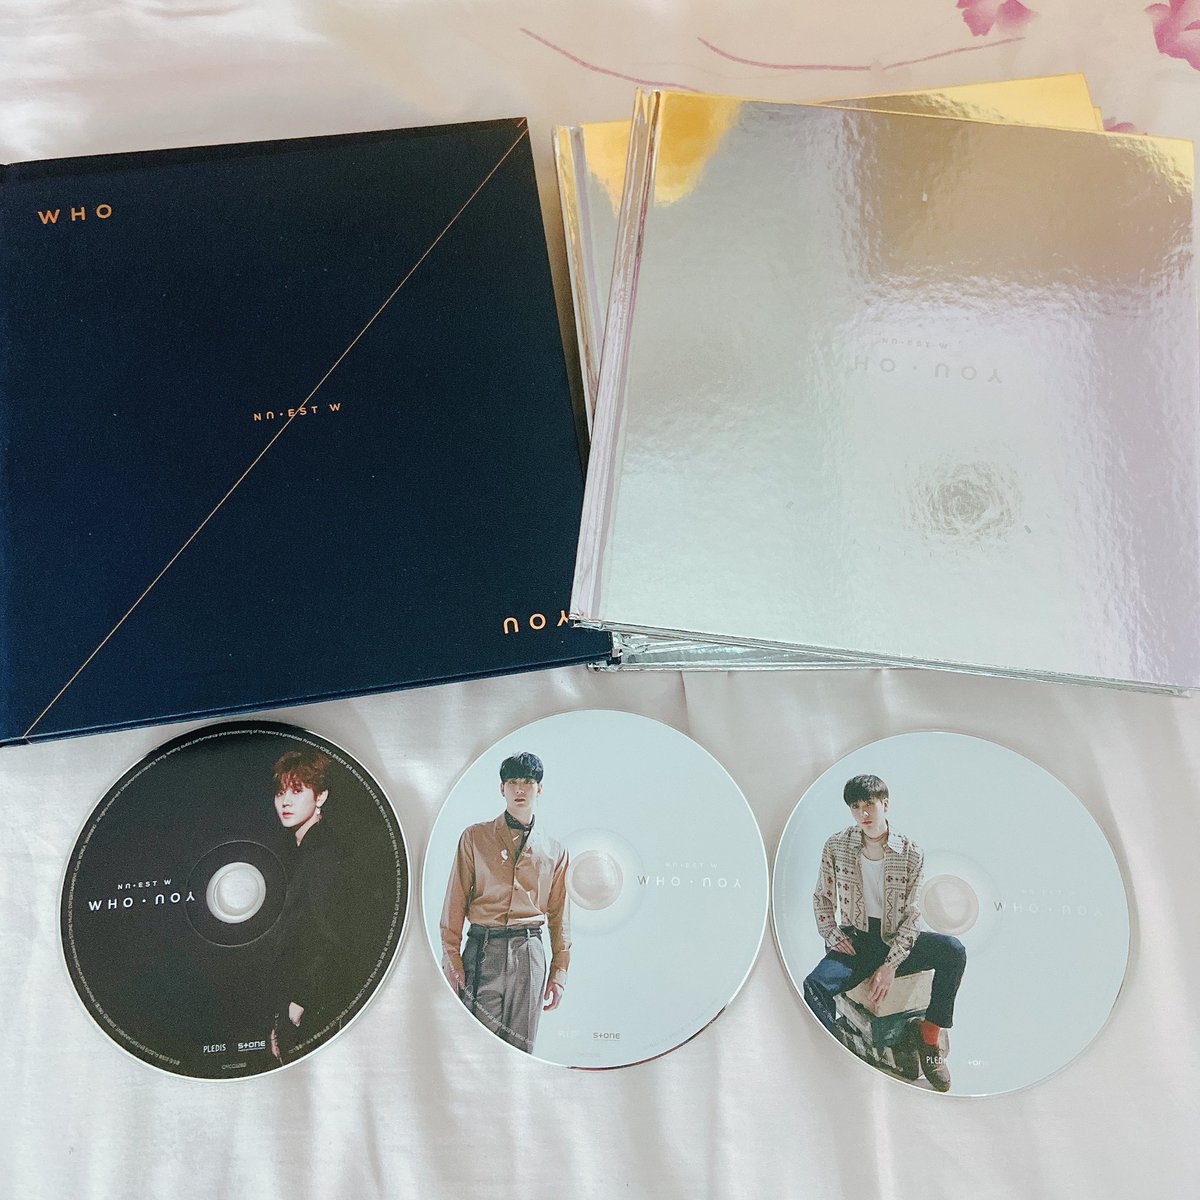 NU’EST W - WHO YOU - 4 x WHO (WHO YOU, silver)- 1 x Baekho CD (silver)- 1 x Aron CD (silver)- 3 x YOU (WHO YOU, blue) - 1 x Ren CD (blue) (All are unsealed albums and does not include PC!) Meetups / Mailing- SG preferred!- Worldwide okay as well - DM if interested